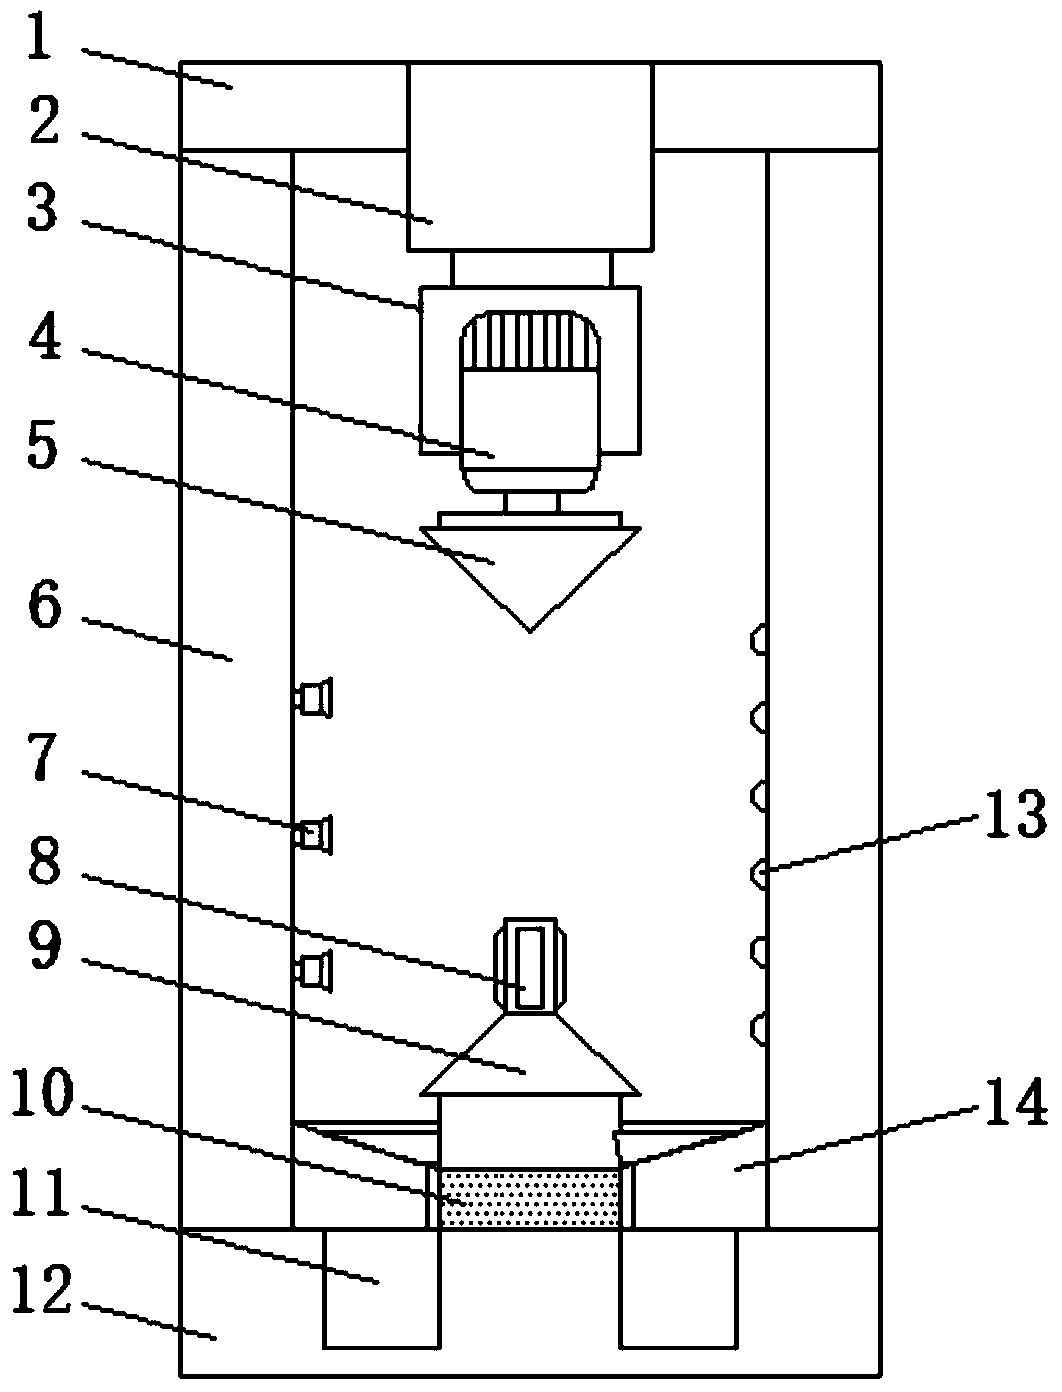 Surface treatment device for non-ferrous metal processing